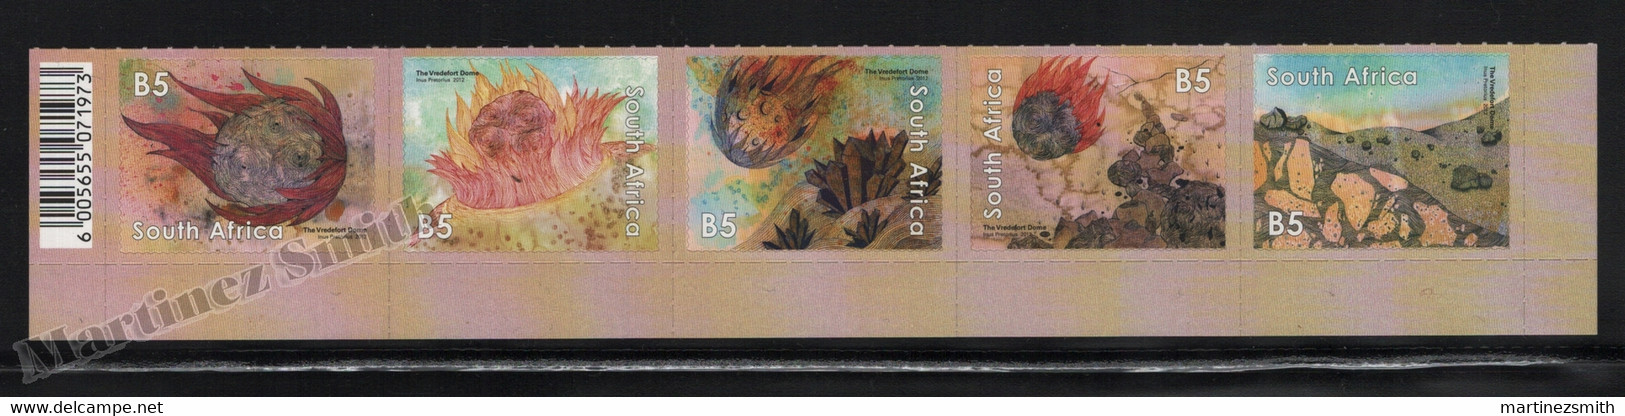 Afrique Du Sud - South Africa 2012 Yvert 1690-94, The Vredefort Dome - Adhesive Full Strip - MNH - Nuevos